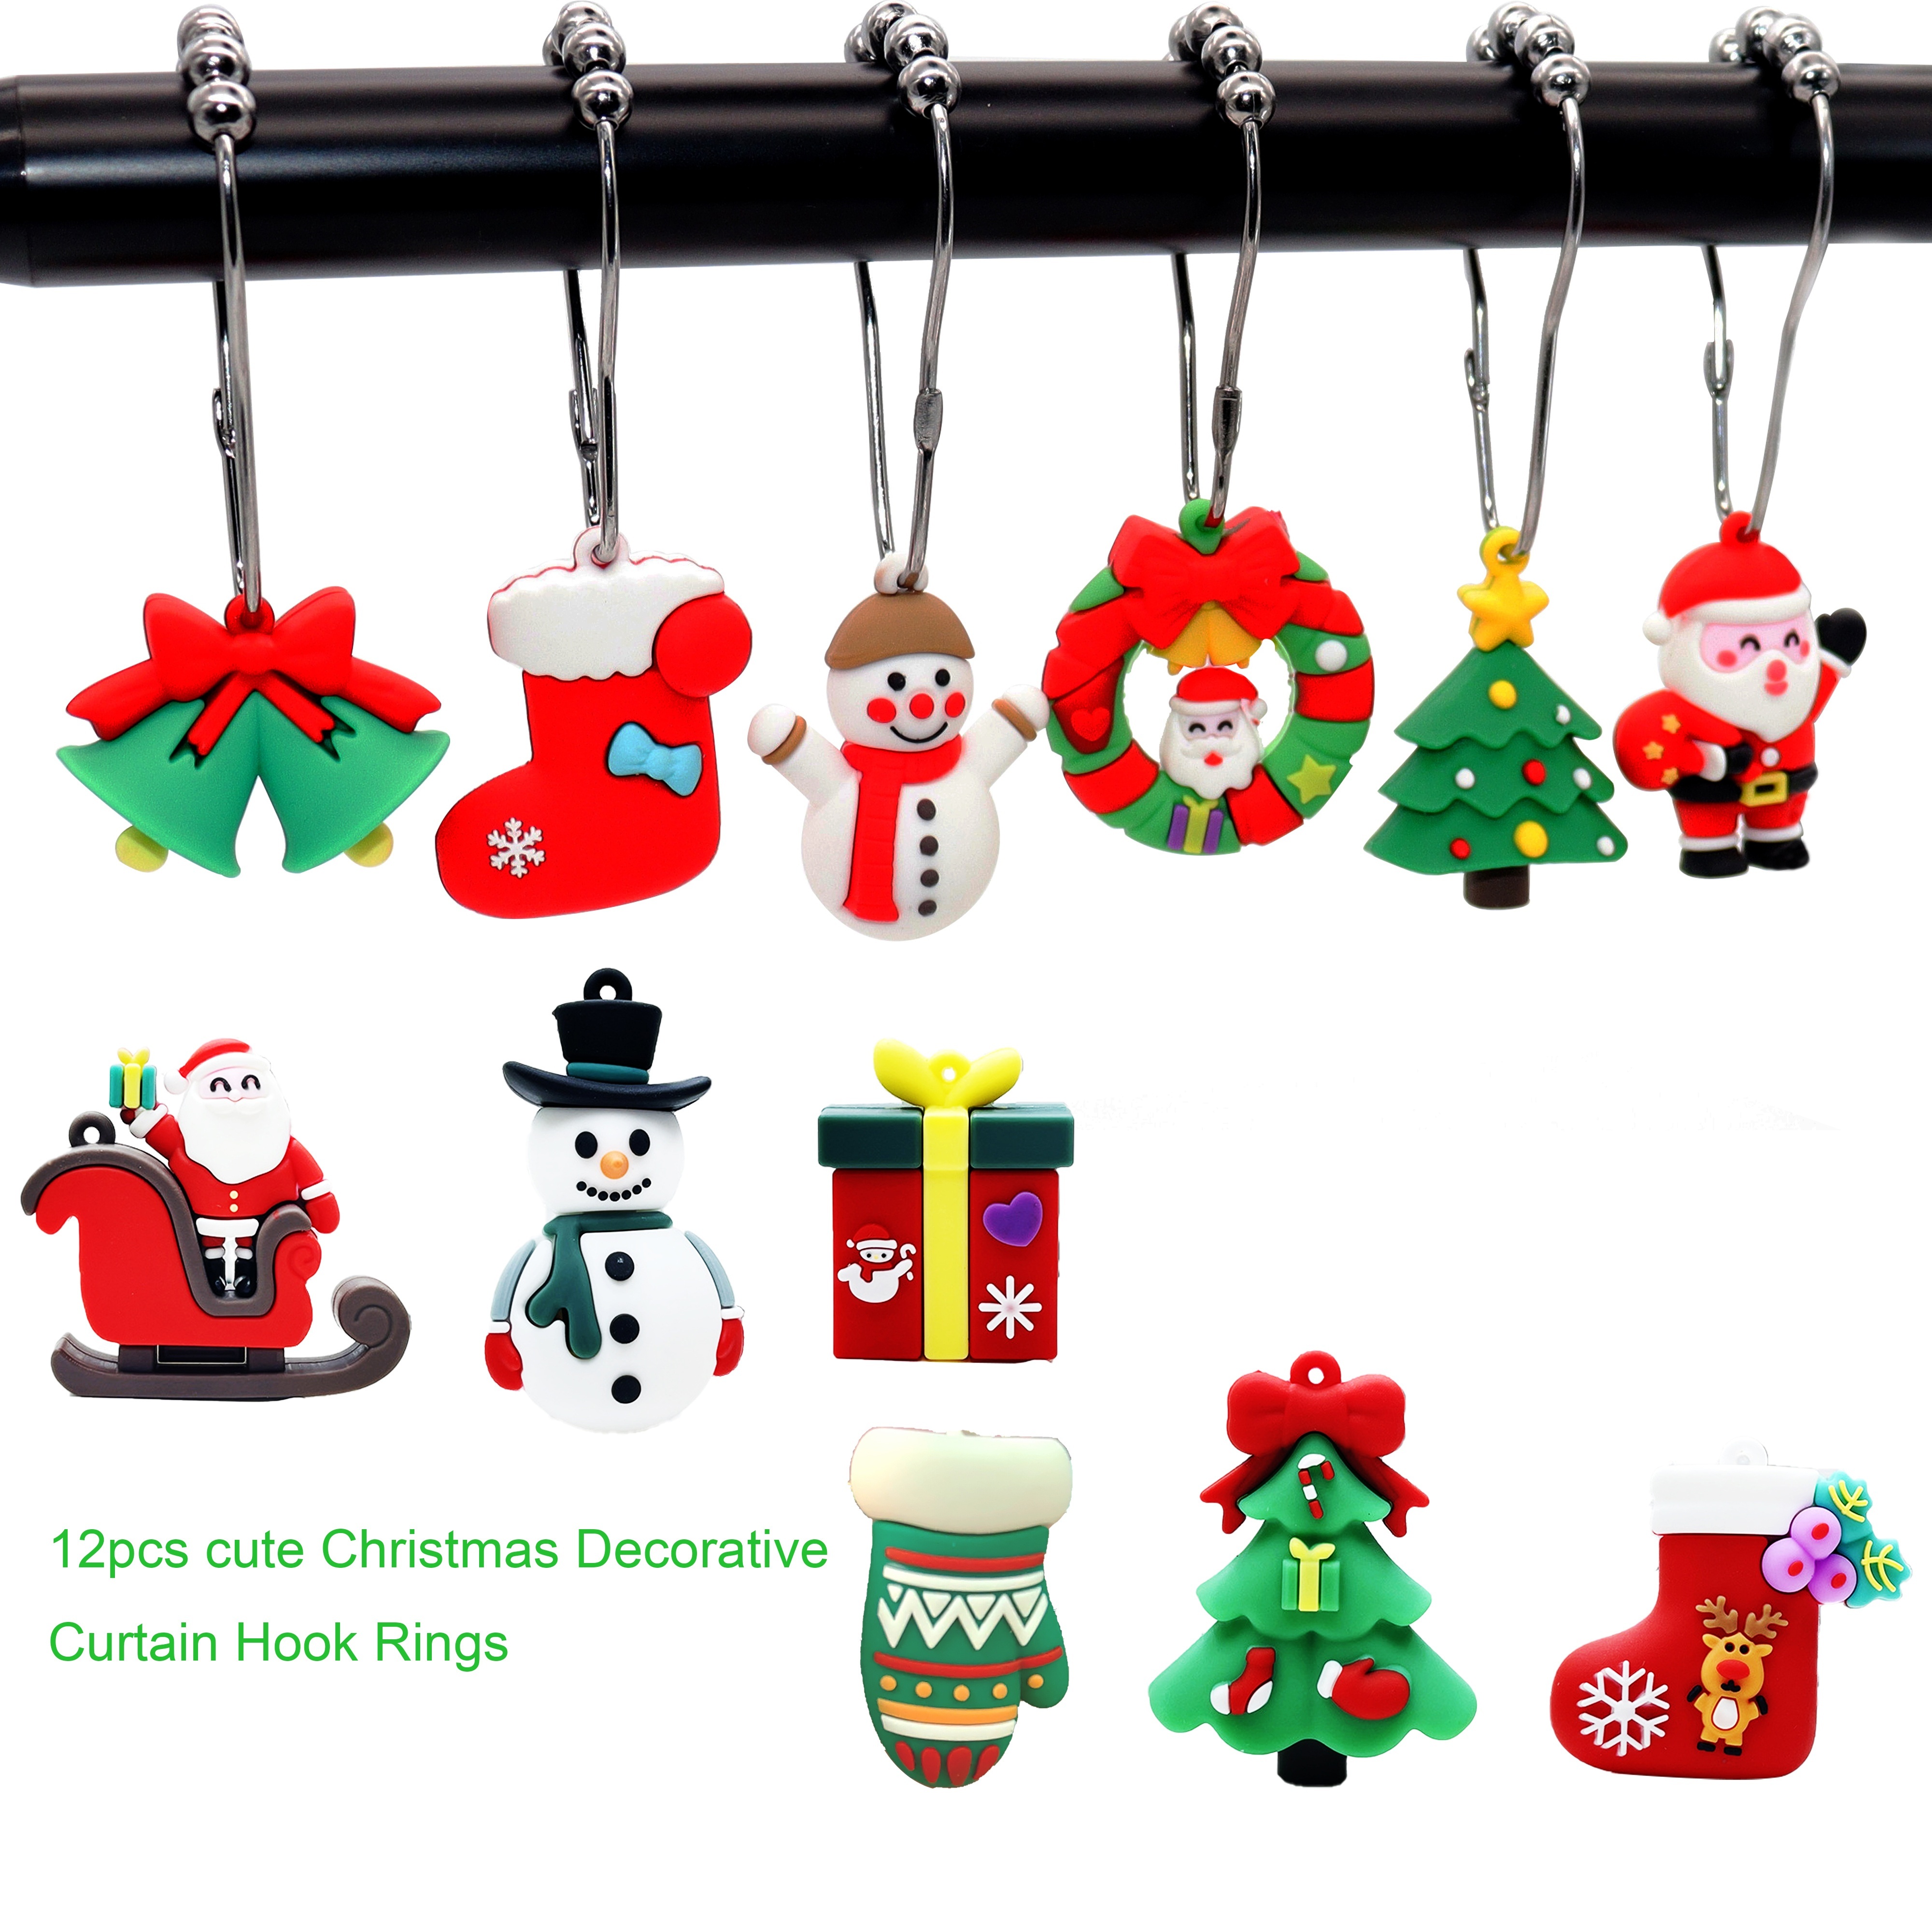 12pcs Silicone Christmas Decorative Shower Curtain Hook, Chrome Cast Iron  Roller Ball Hook, Creative Cartoon Shower Curtain Hook Ring, Christmas